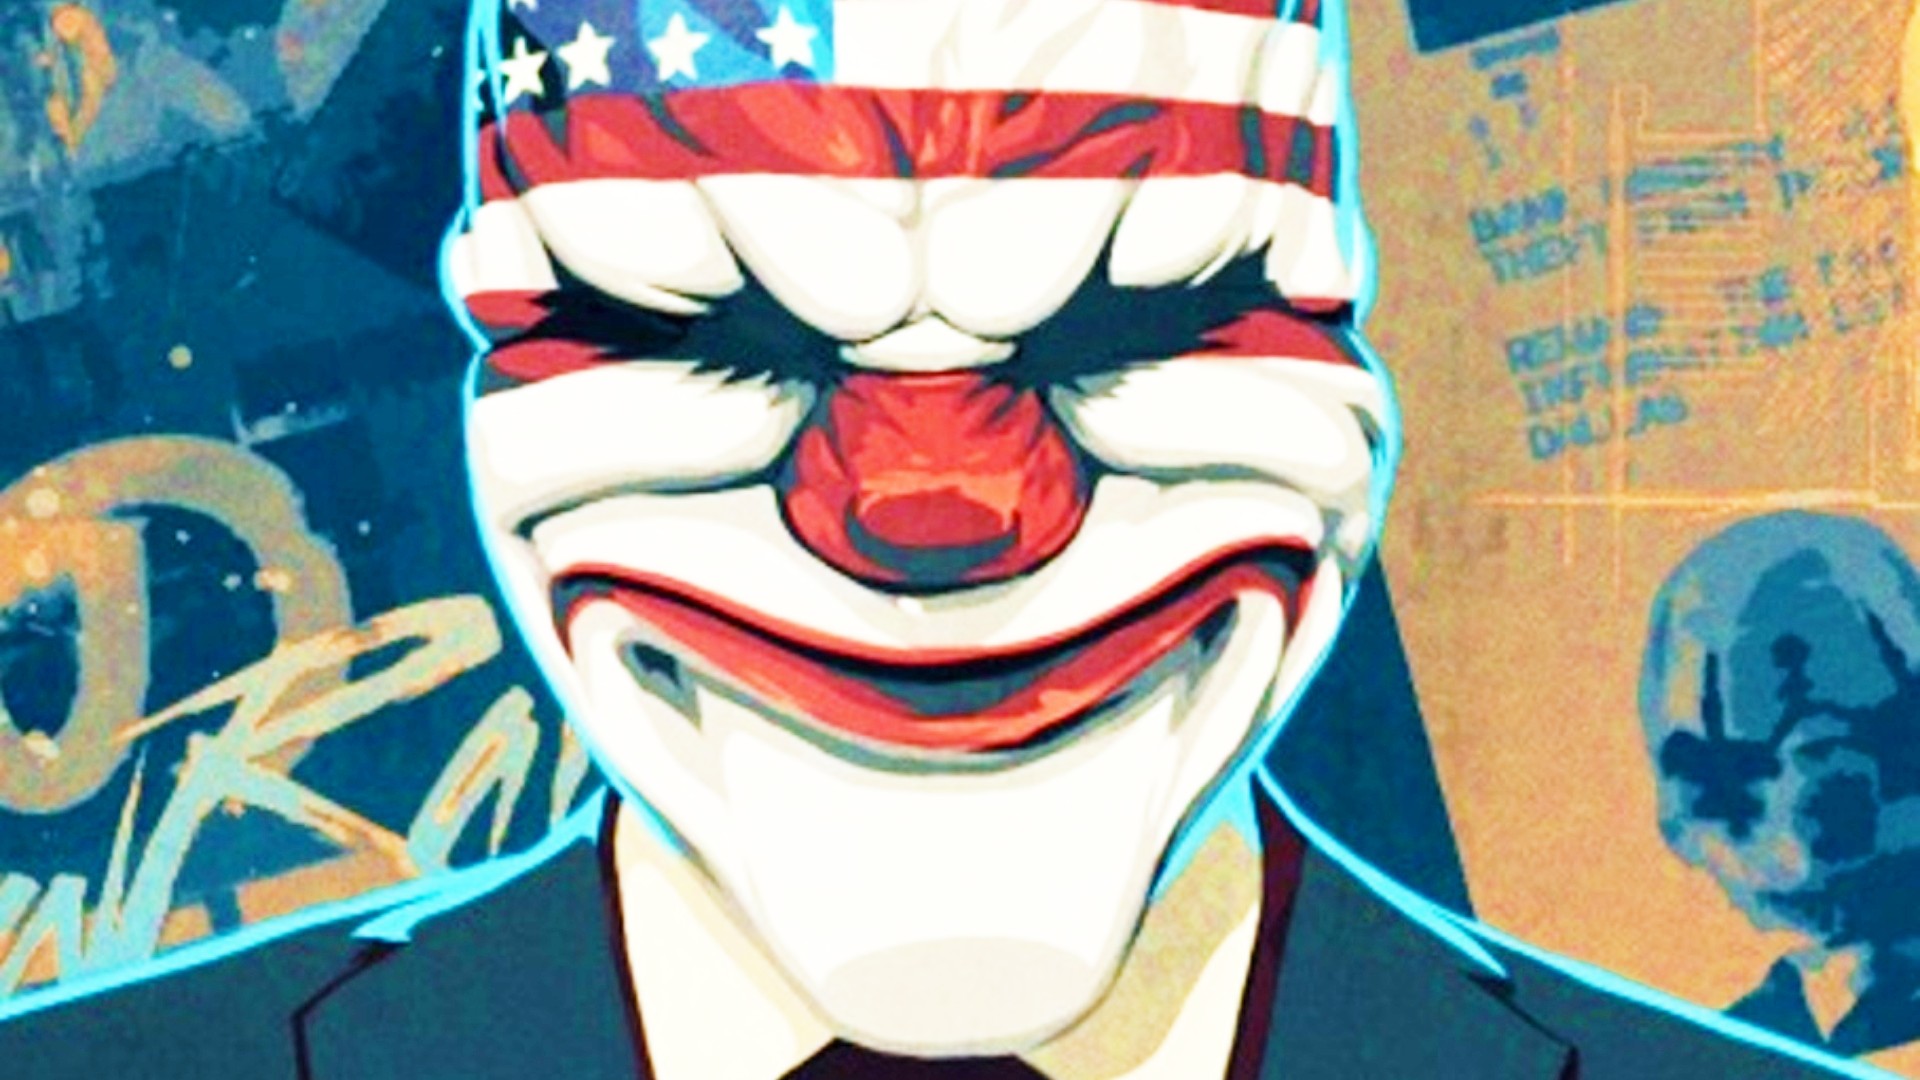 Payday 3 devs address matchmaking issues & reconsider always